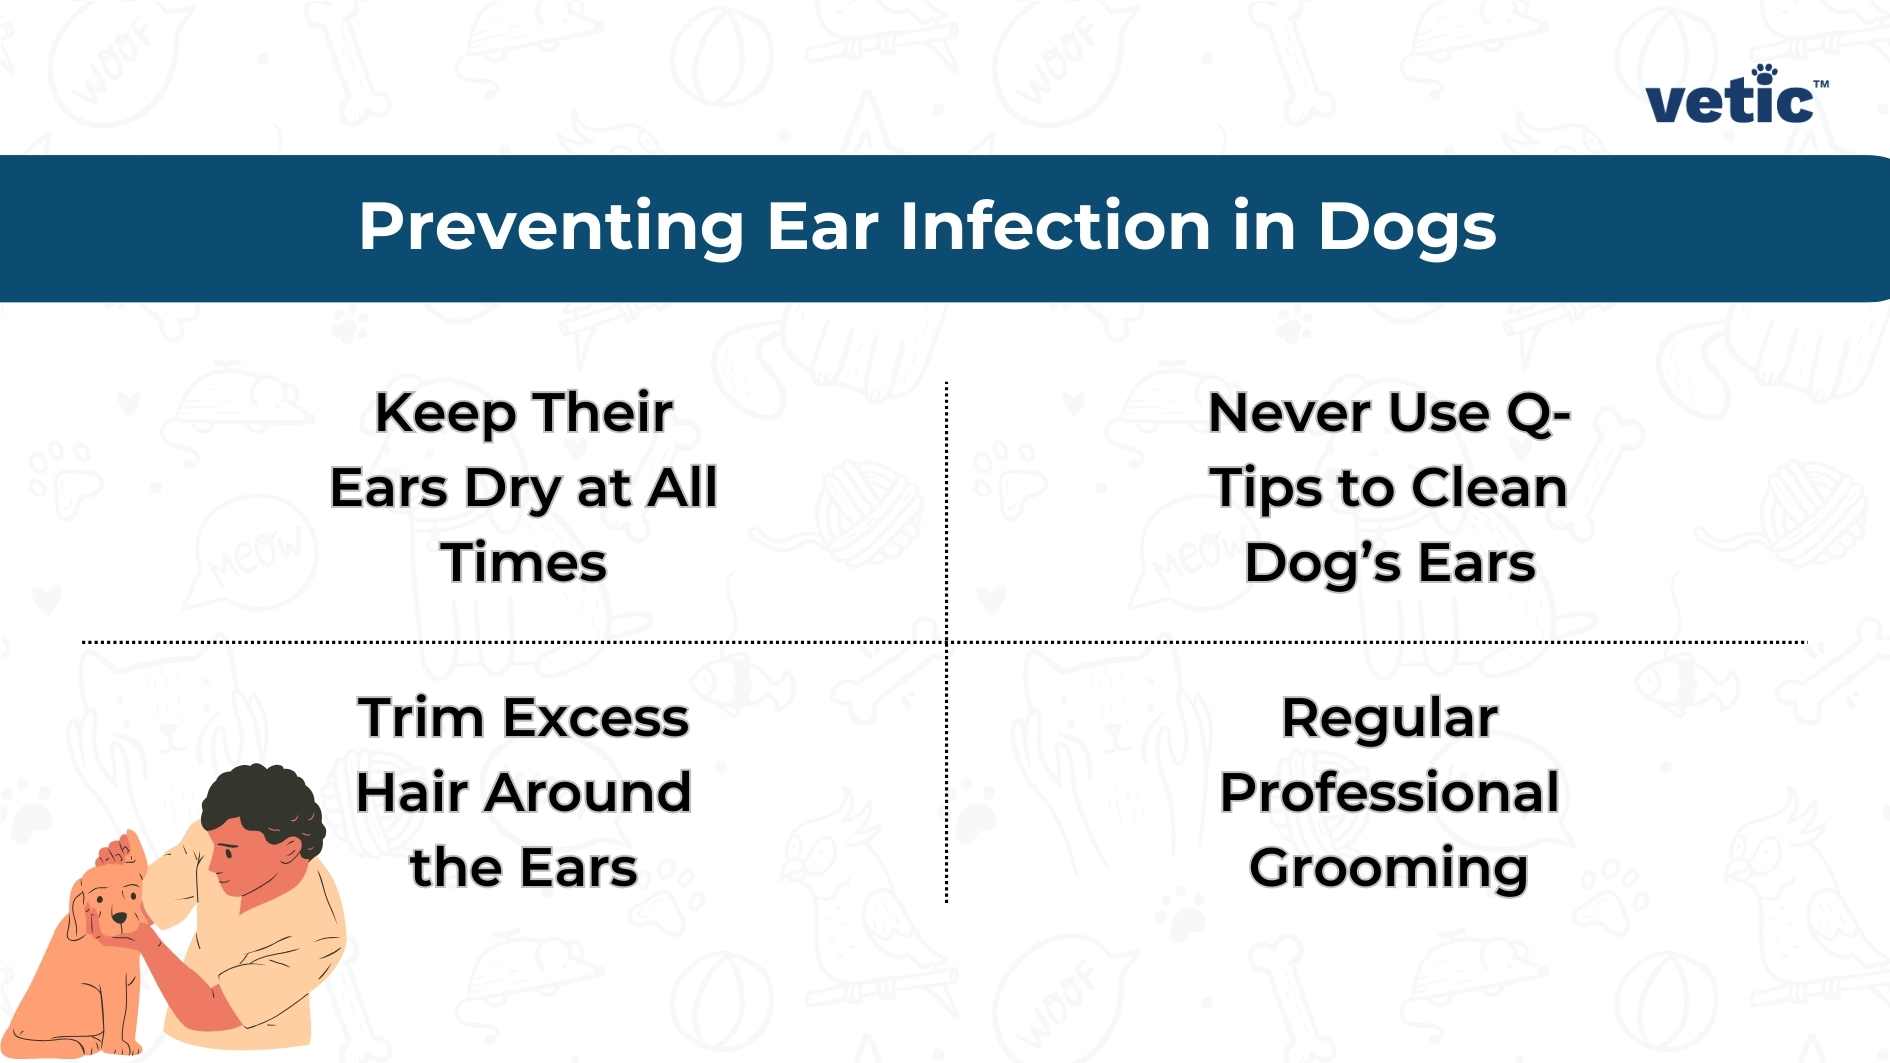 An informational image from Vetic® on preventing ear infection in dogs, featuring tips like keeping the dog’s ears dry, avoiding the use of Q-tips for cleaning, trimming excess hair around the ears, and ensuring regular professional grooming.